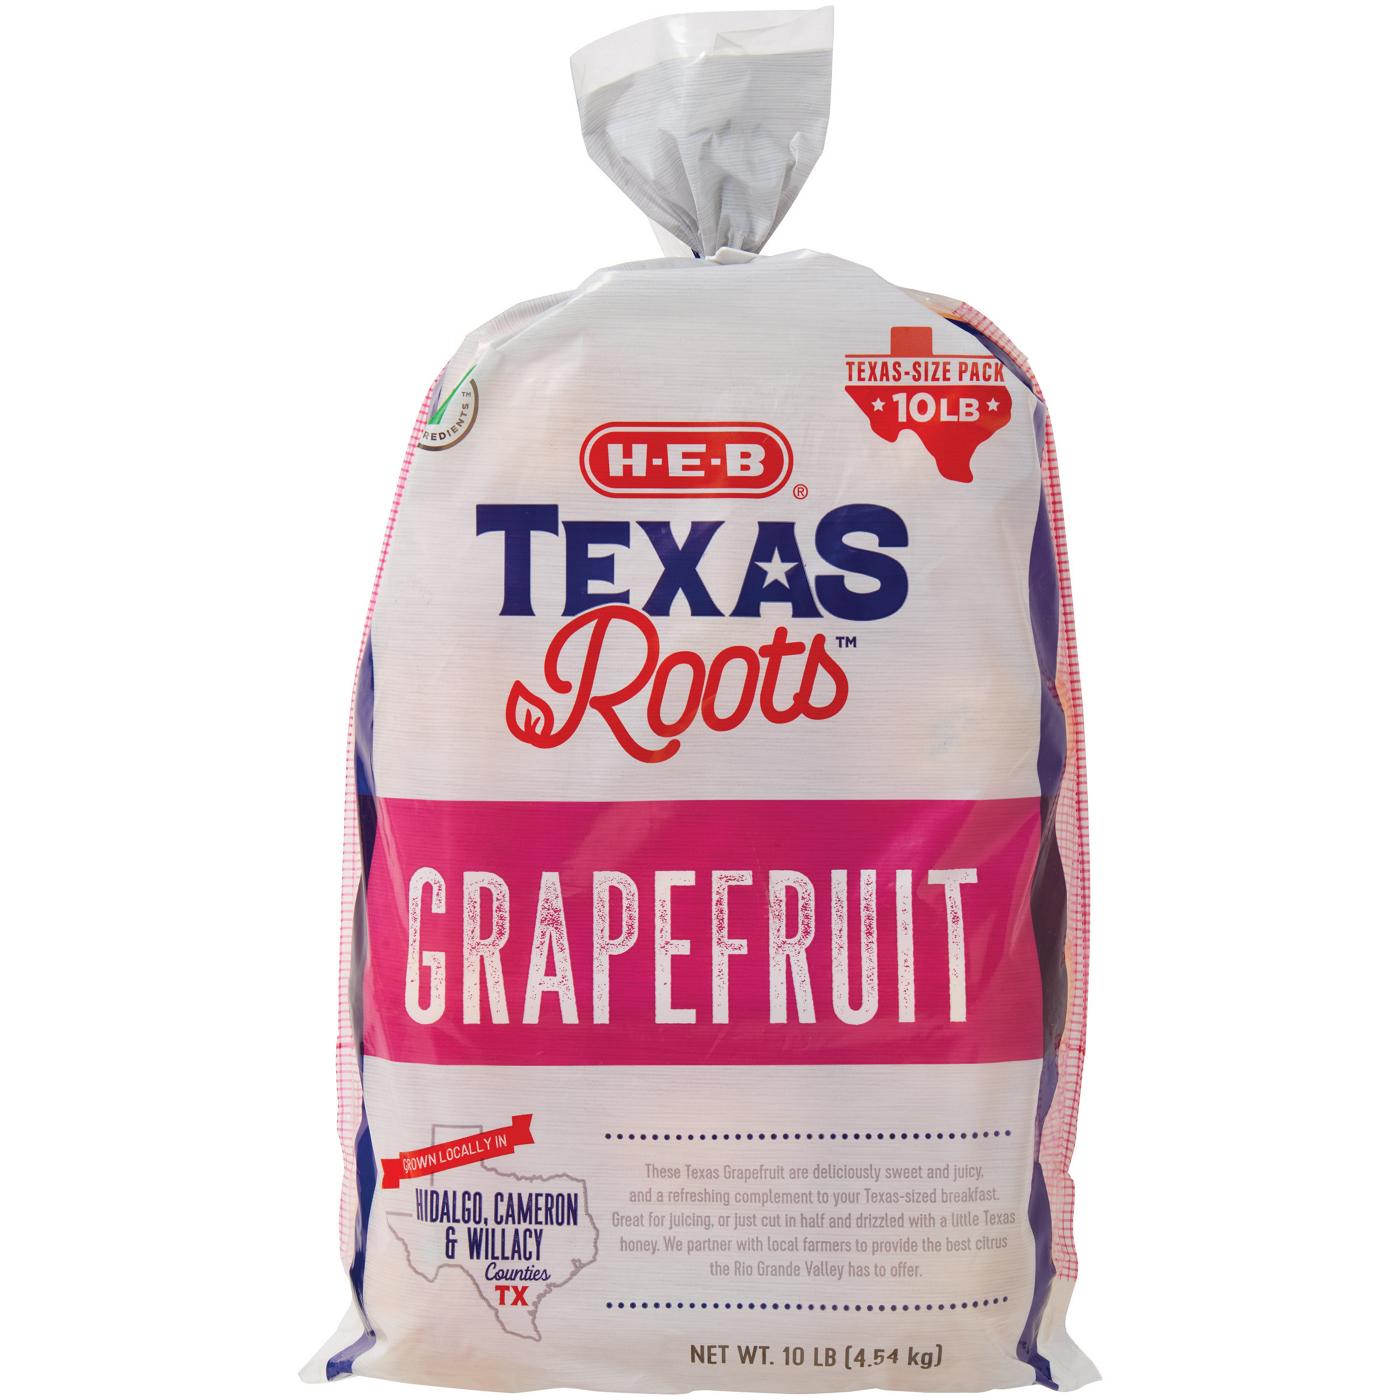 H-E-B Texas Roots Fresh Grapefruit - Texas-Size Pack; image 1 of 3